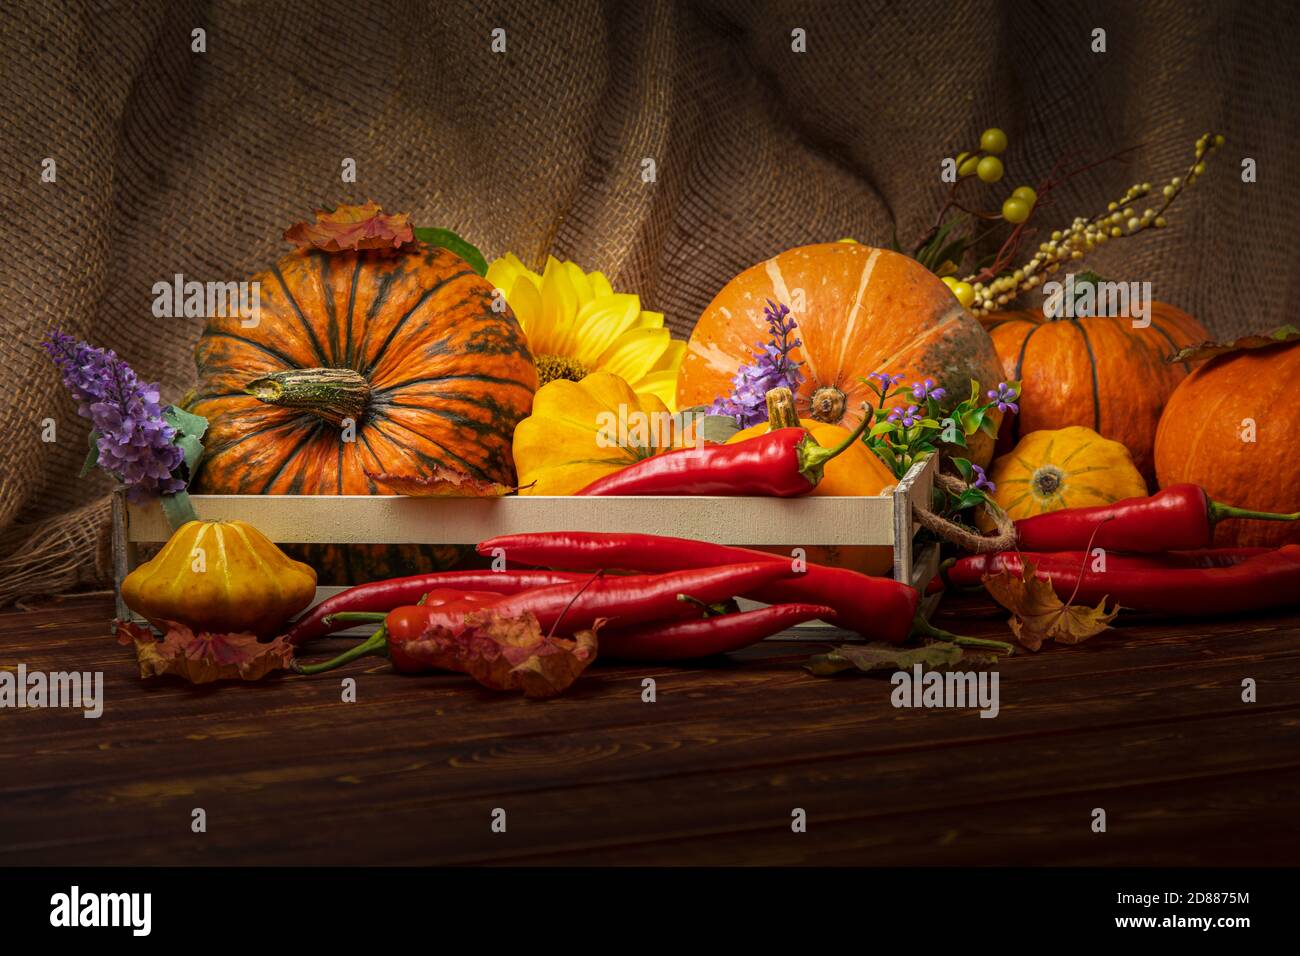 Abundance cornucopia consept with pumpkins, red hot chili peppers, purple flowers, fall  leaves on the rustic wooden background Stock Photo